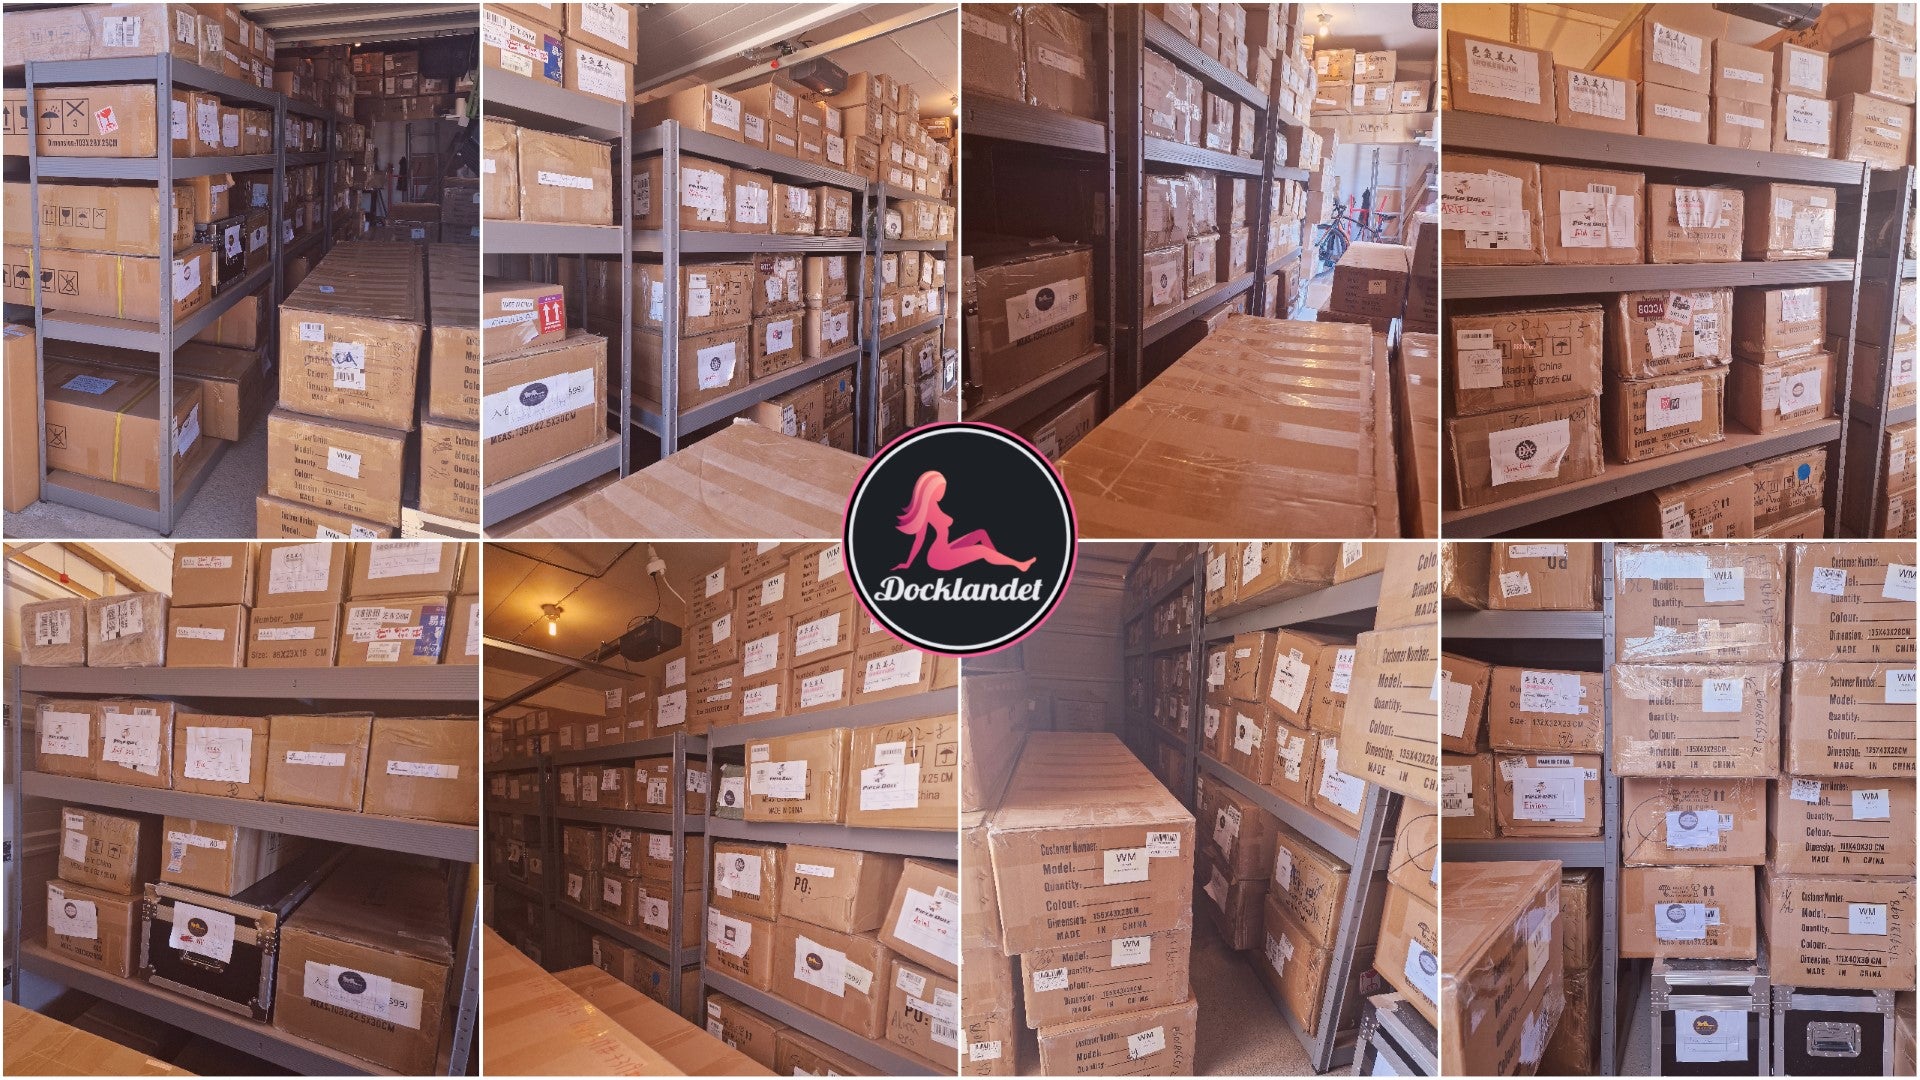 Pick up your sex doll at Docklandets warehouse in Borlänge. The picture shows several packaged sex dolls and the Docklandets logo in the middle.